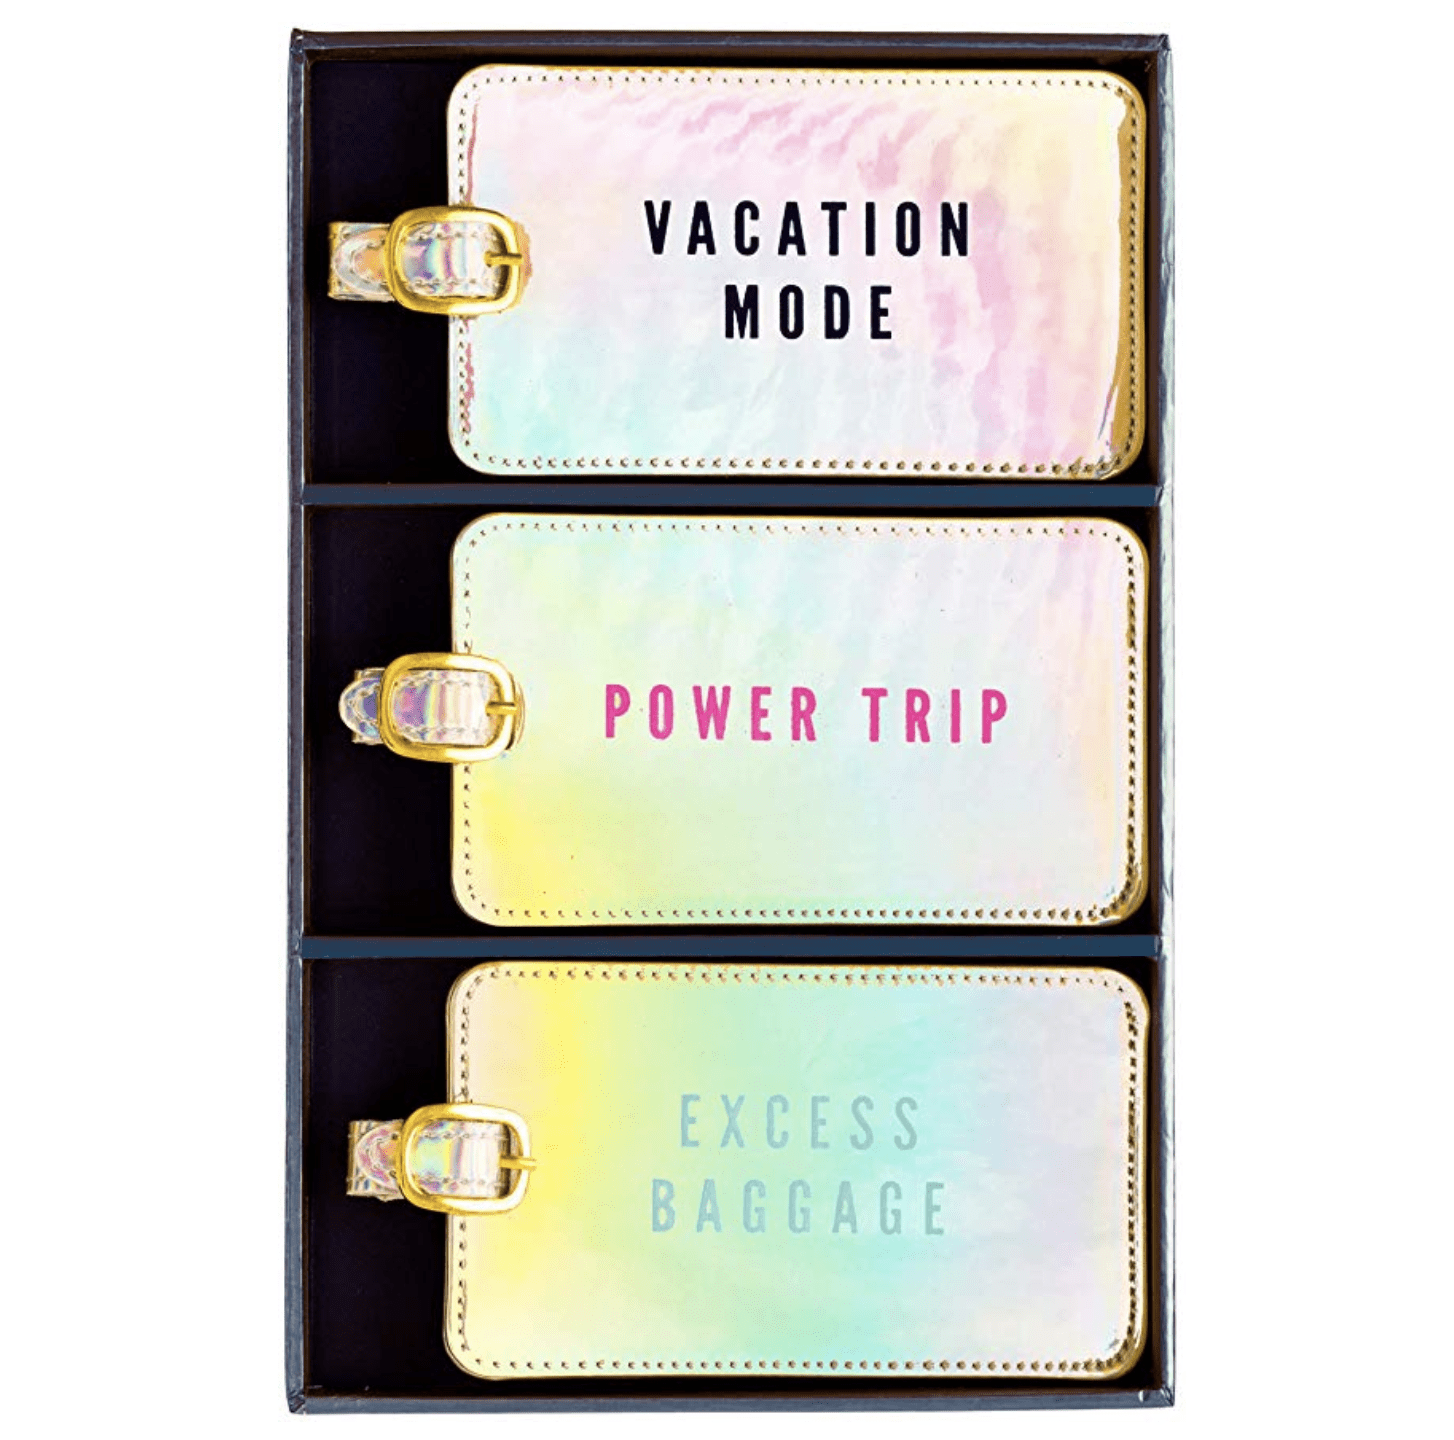 funny luggage tags - vacation mode power trip excess baggage